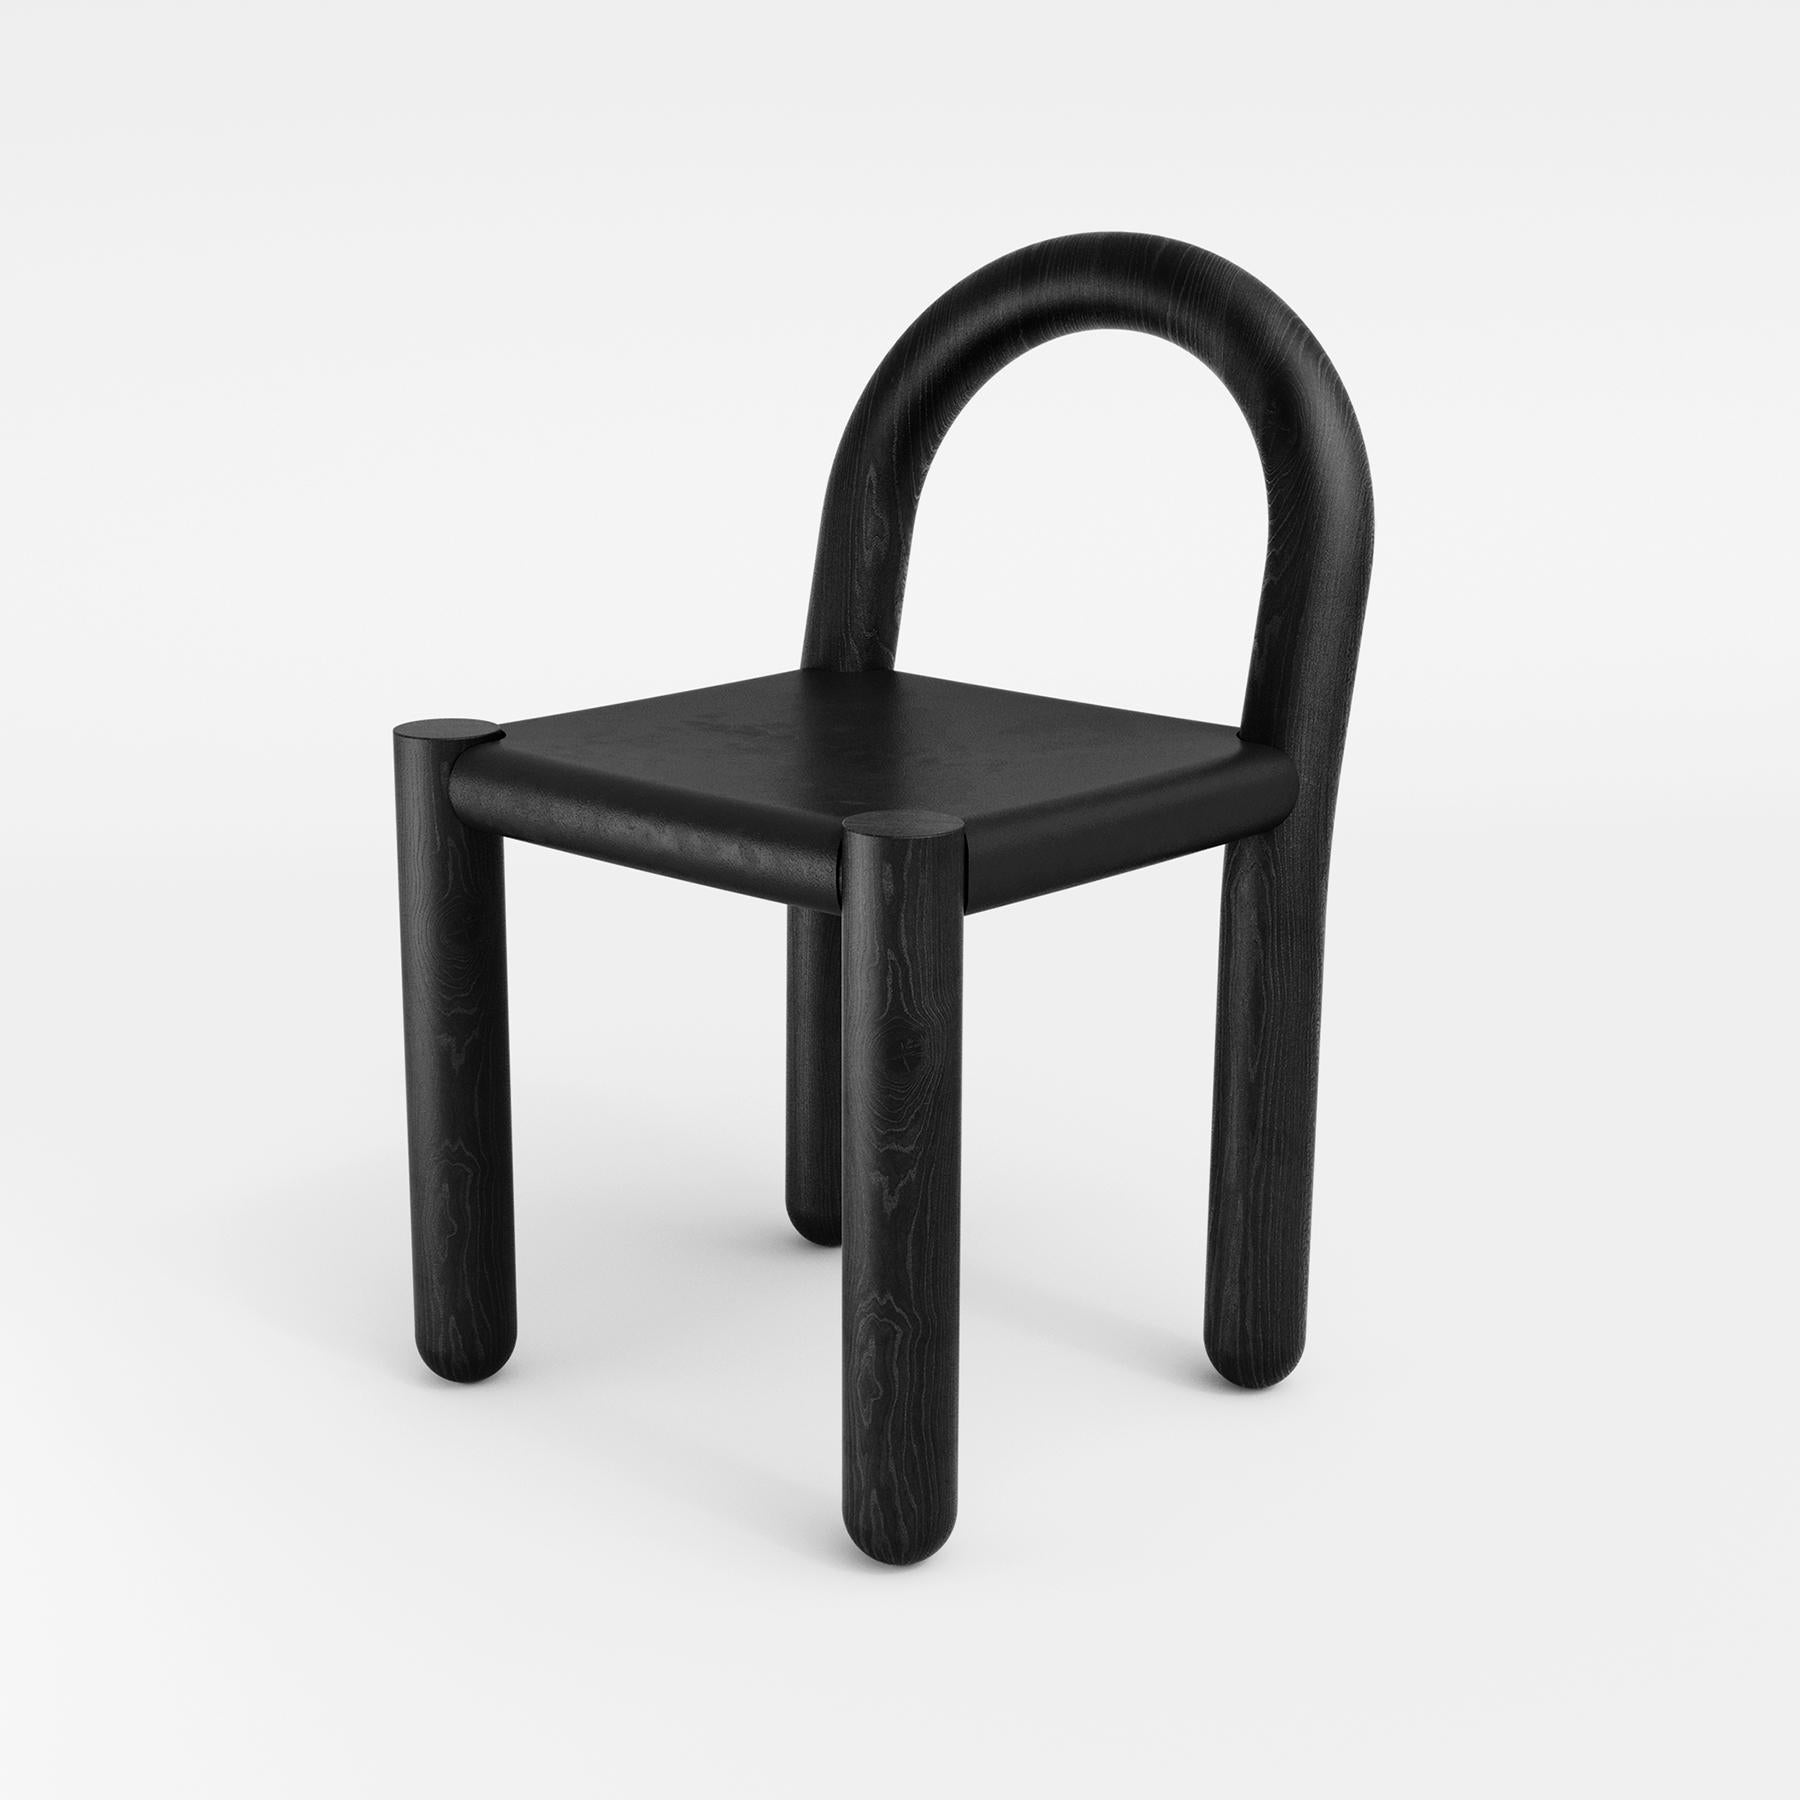 Hand-Crafted Missa Chair in Leather and Wood by Pedro Paulo Venzon